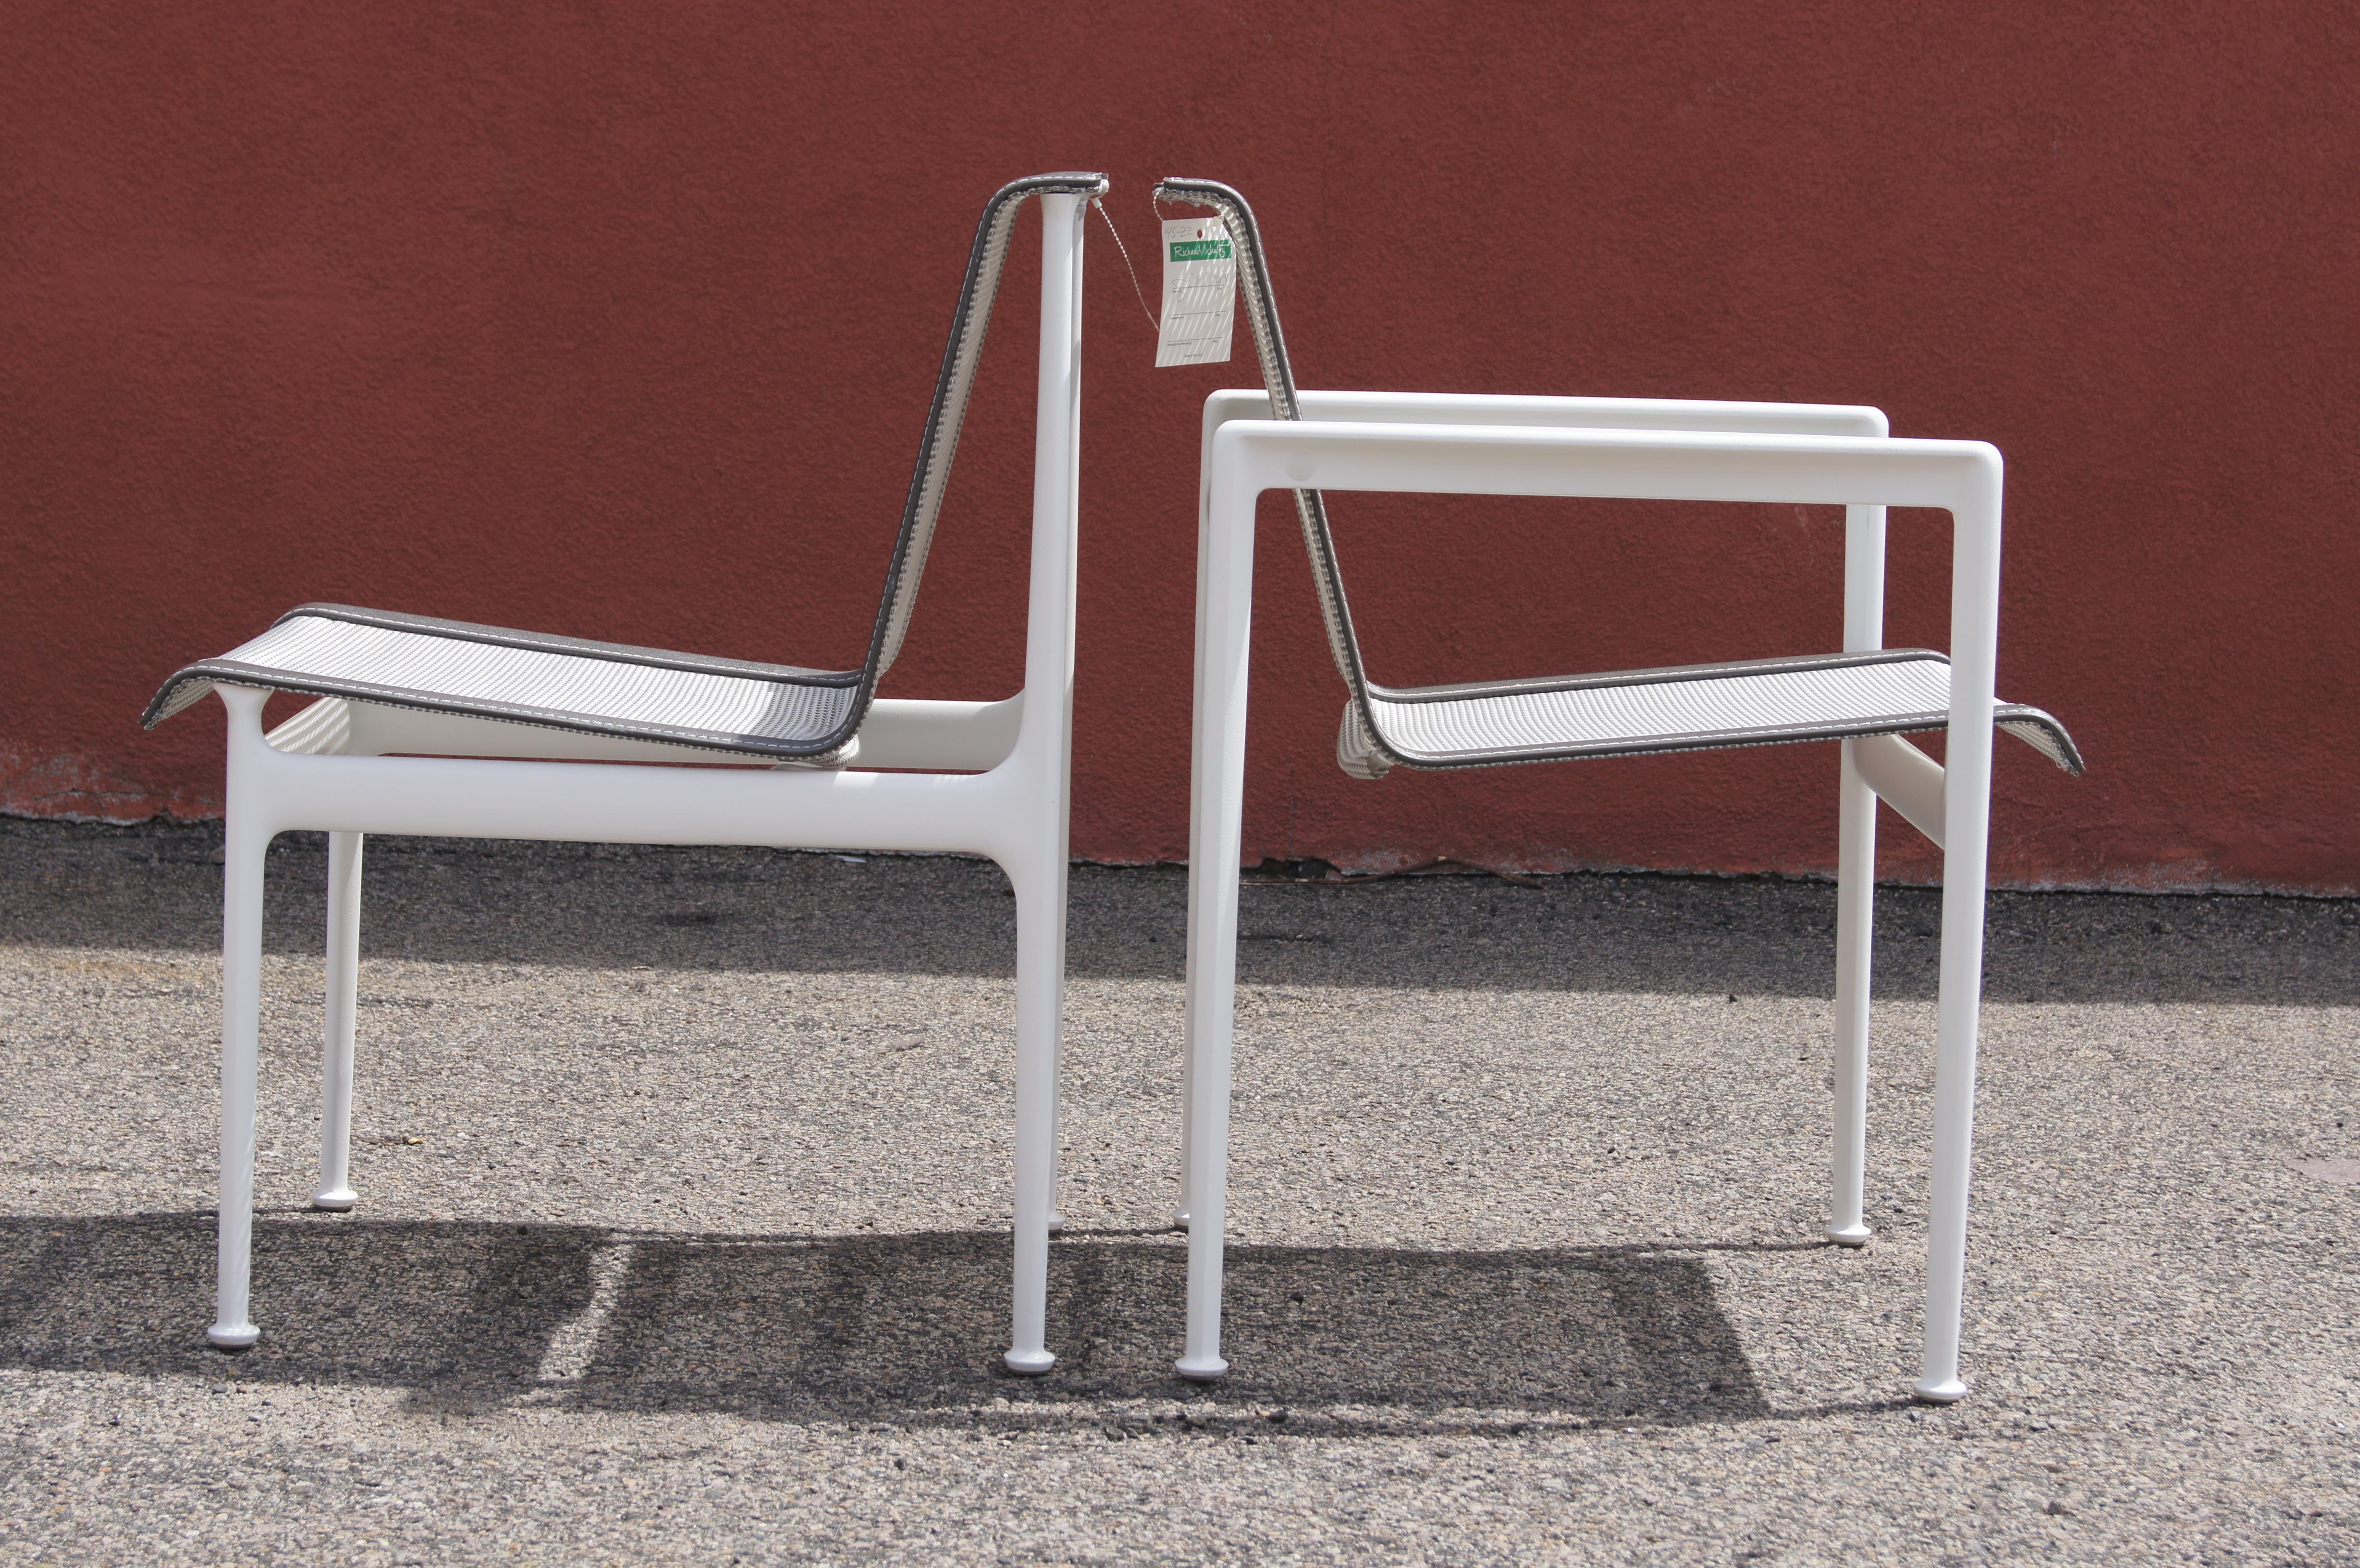 American Set of Four 1966 Collection Outdoor Chairs by Richard Schultz For Sale